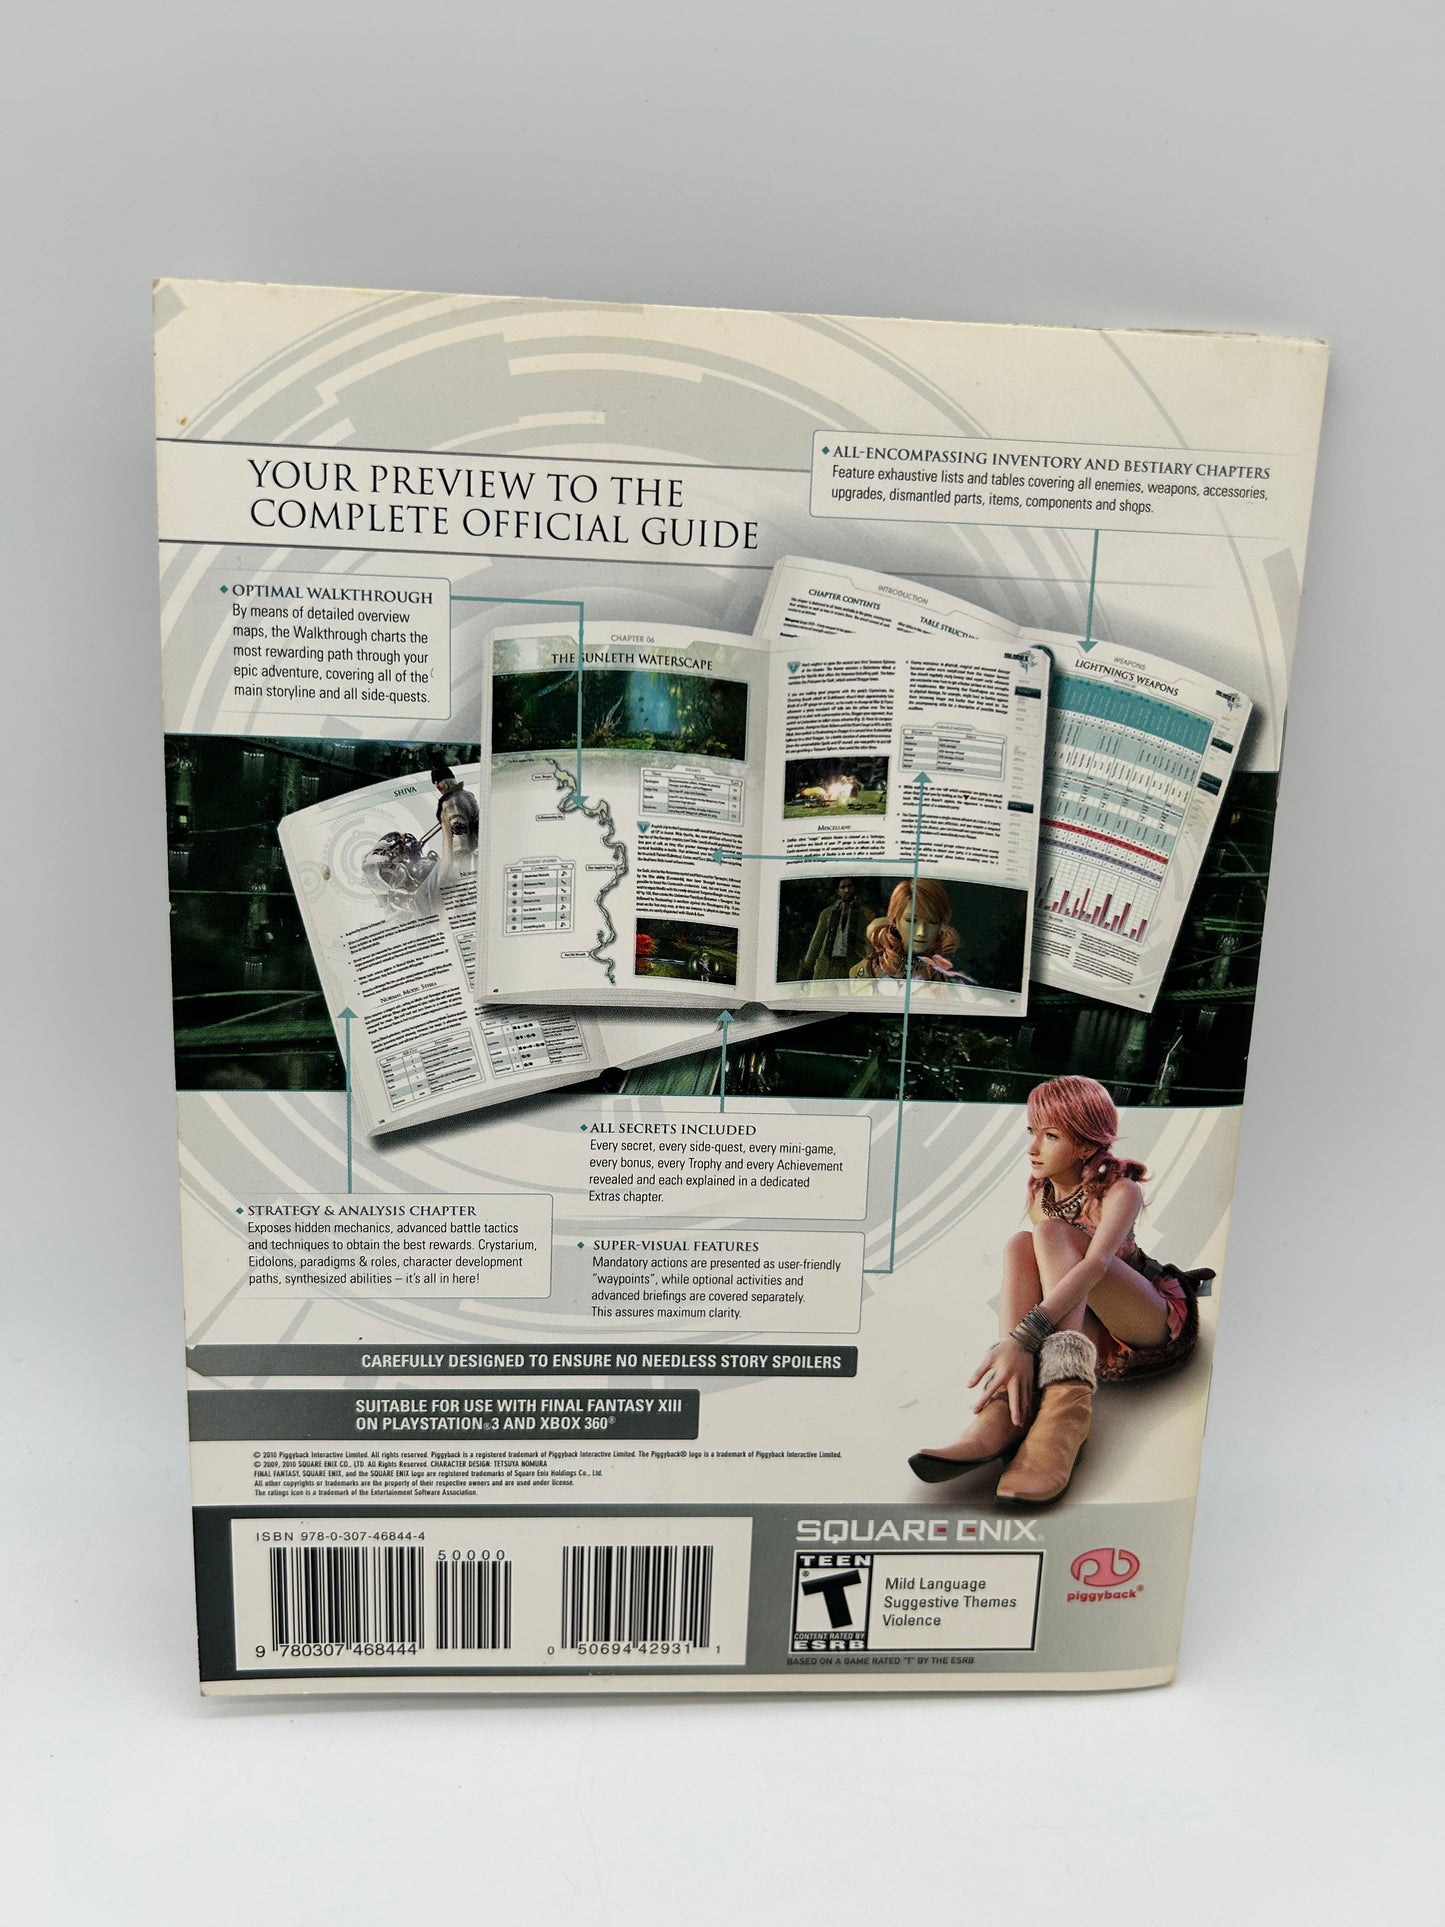 FiNAL FANTASY XIII STRATEGY GUIDE PiGGYBACK THE OFFiCiAL MINI GUIDE